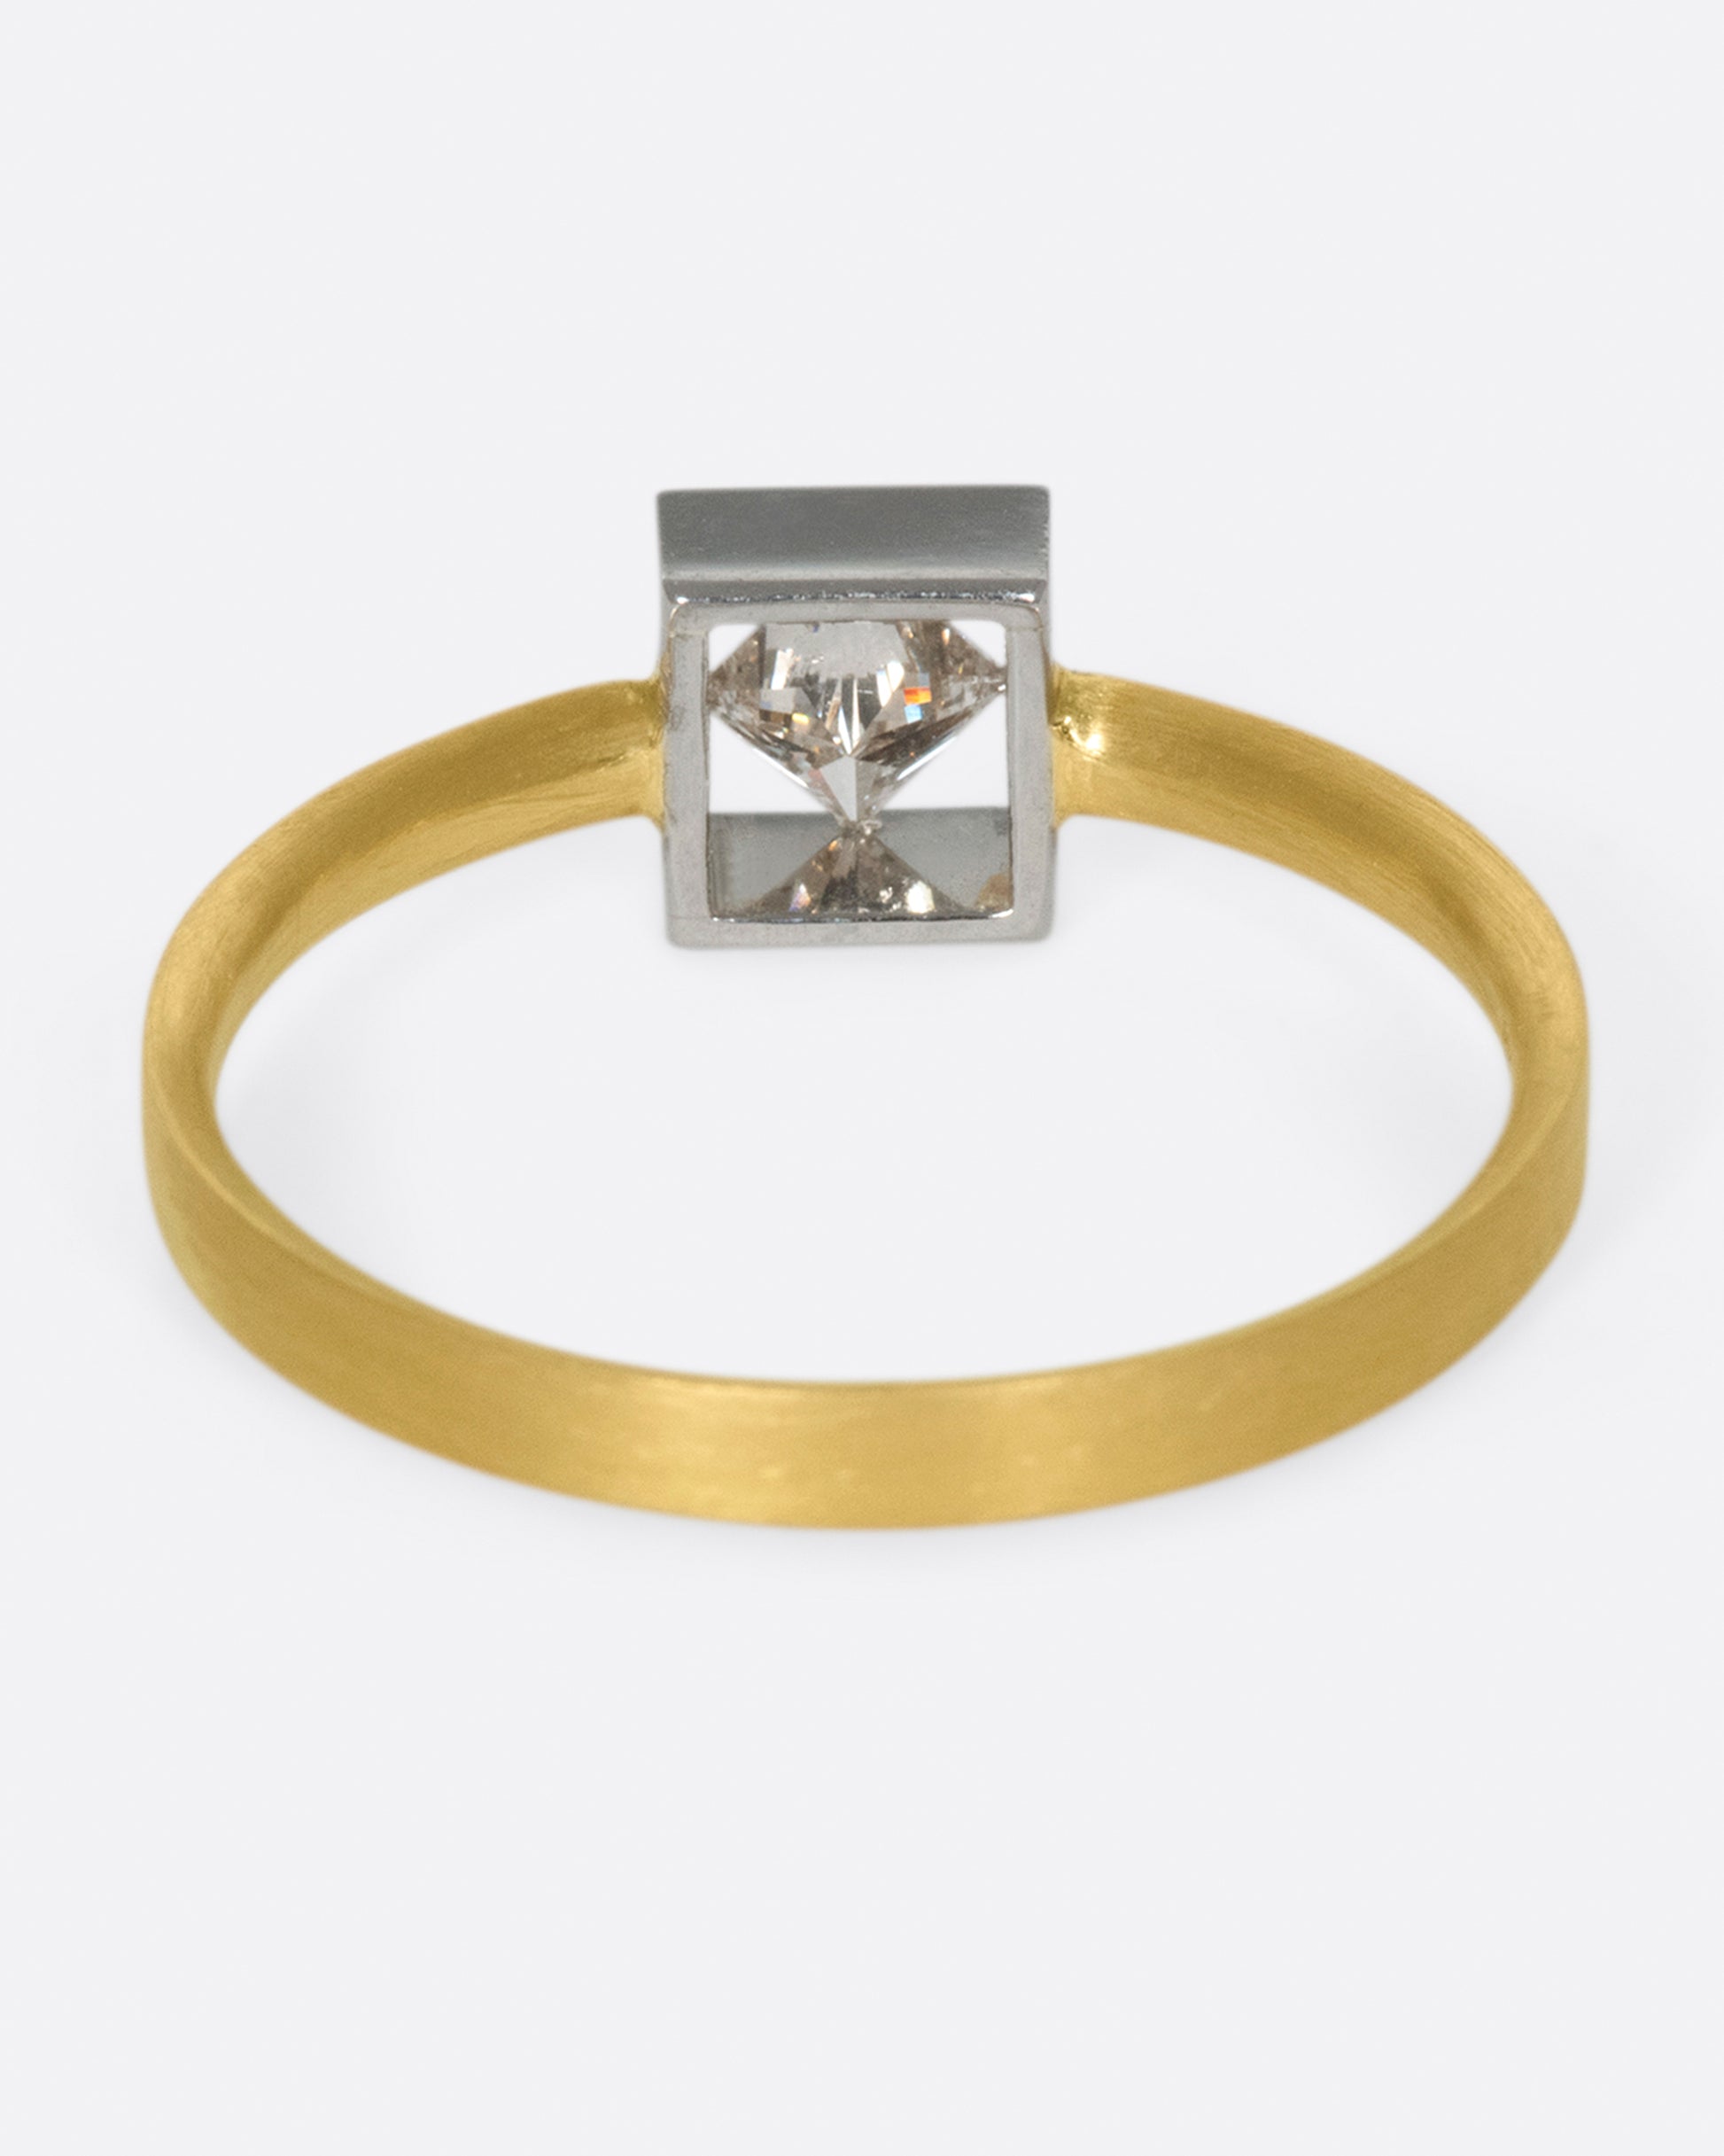 A geometric solitaire ring with a princess cut diamond set on its side in a platinum setting on a yellow gold band.